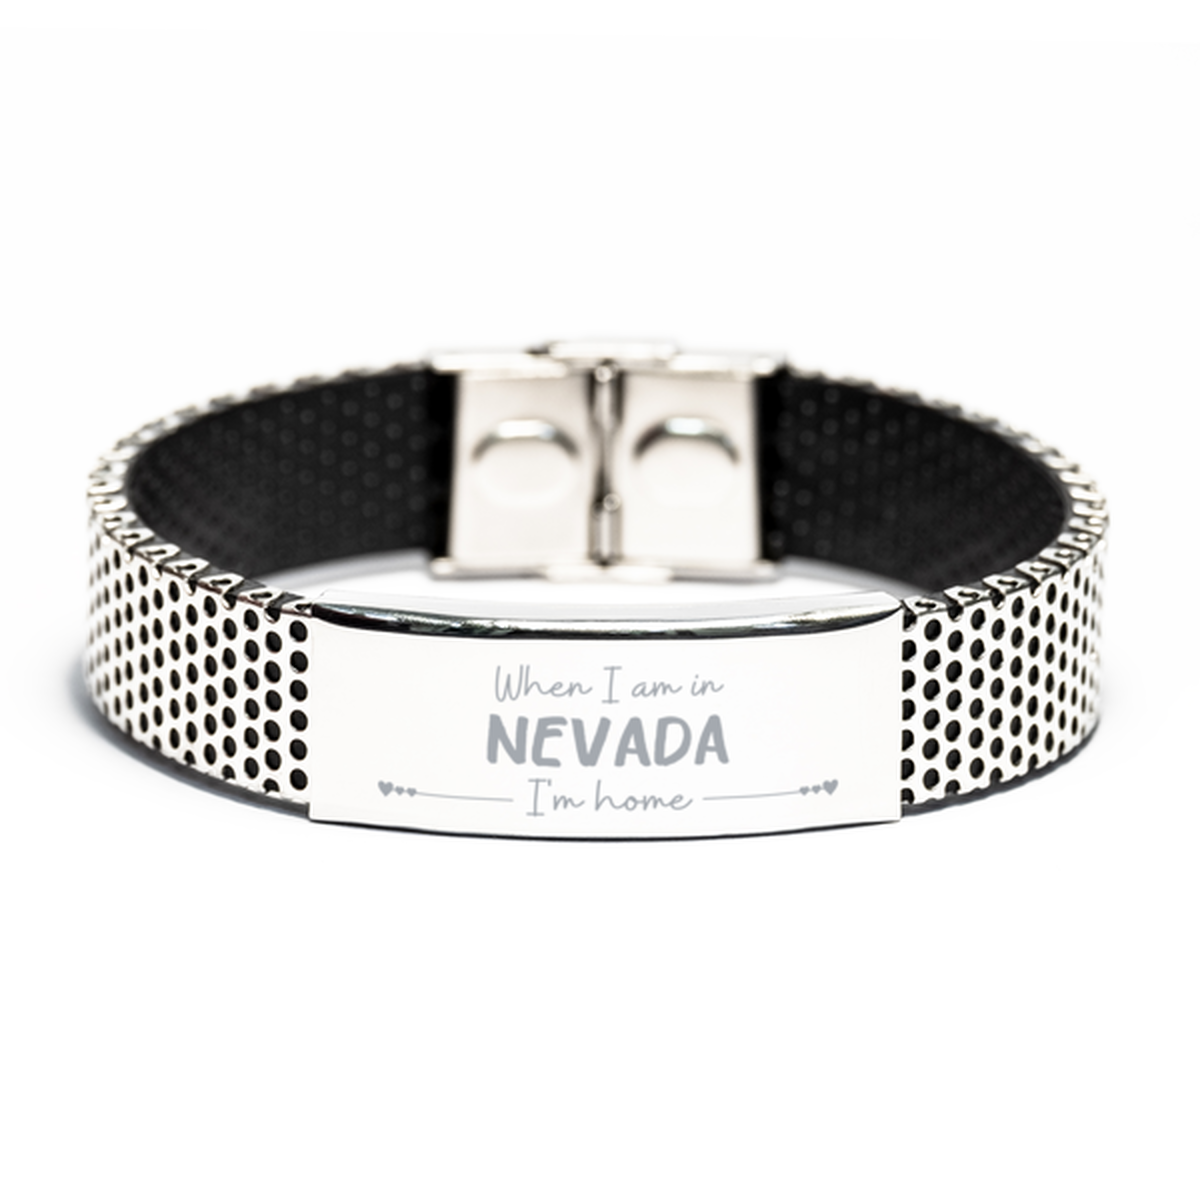 When I am in Nevada I'm home Stainless Steel Bracelet, Cheap Gifts For Nevada, State Nevada Birthday Gifts for Friends Coworker